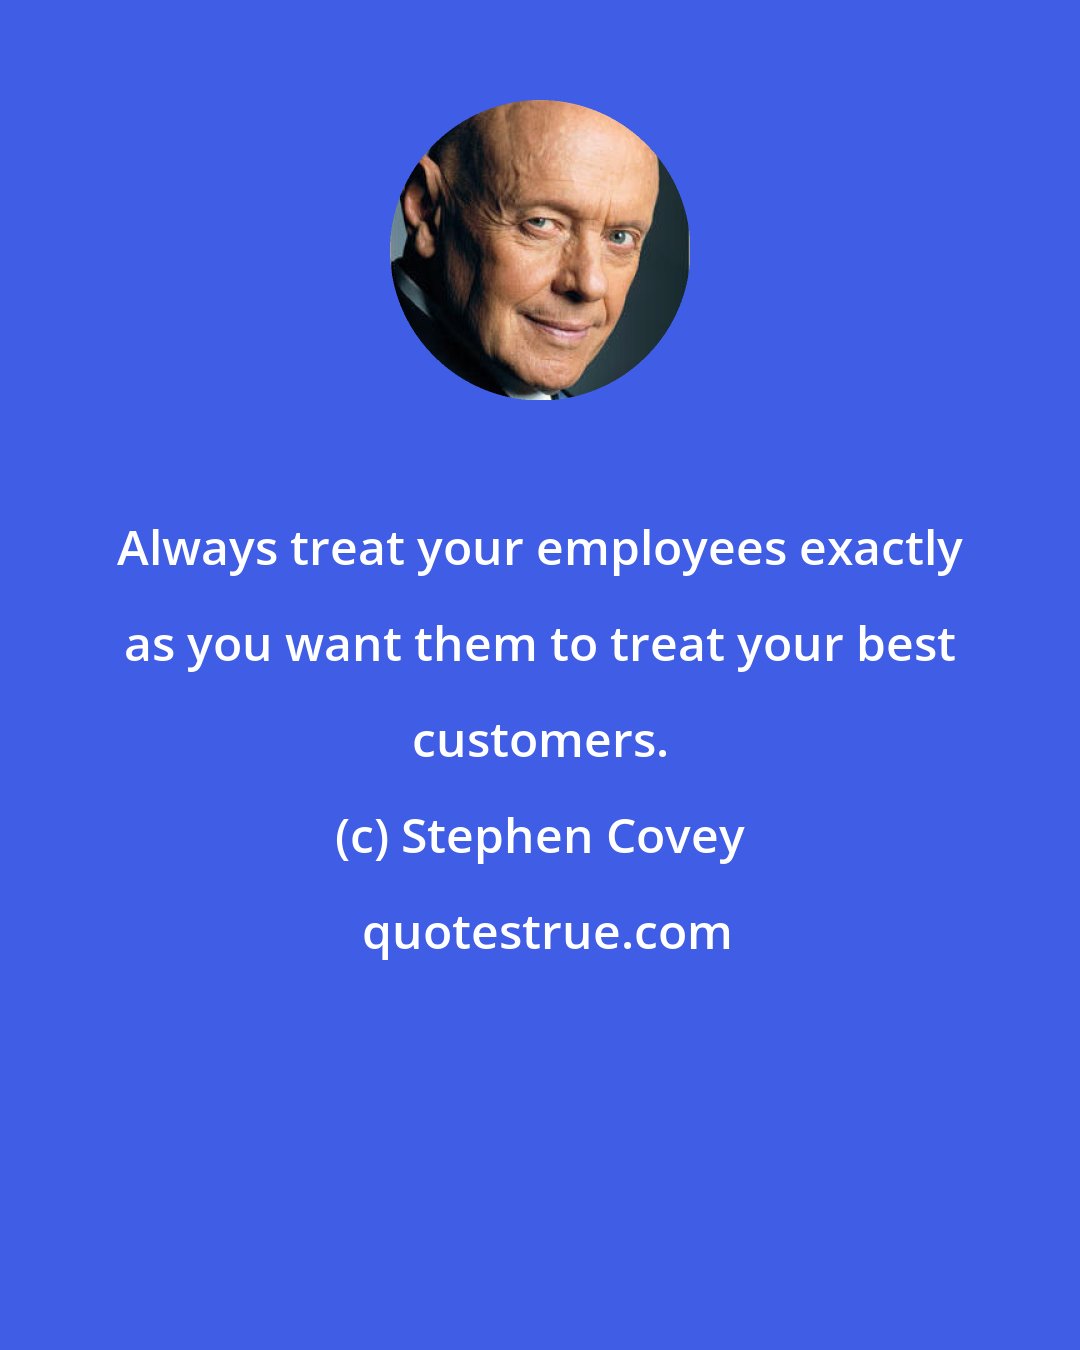 Stephen Covey: Always treat your employees exactly as you want them to treat your best customers.